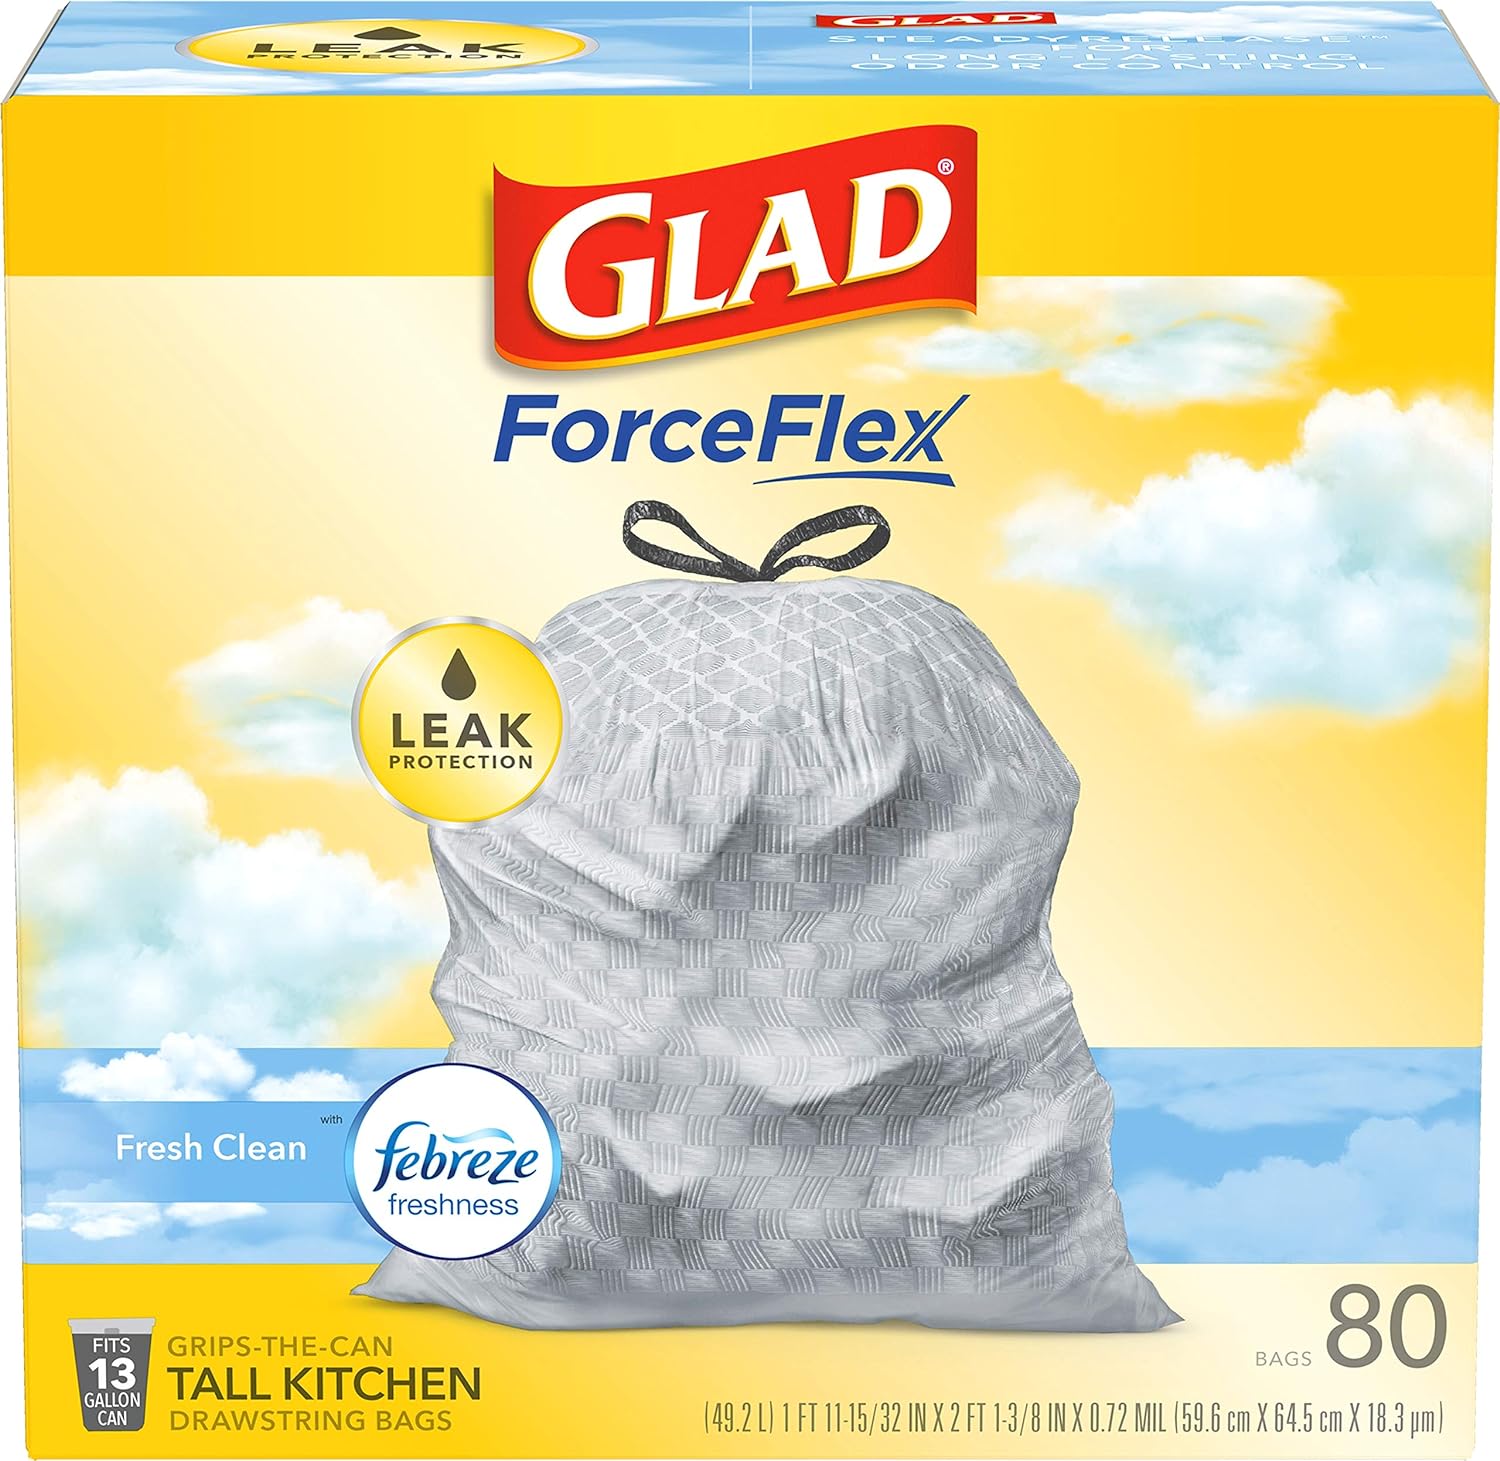 80-Count 13-Gallon Glad ForceFlex Tall Kitchen Drawstring Trash Bags (Febreze) $15.51 + $3 Amazon Credit w/ S&S Free Shipping w/ Prime or on $35+